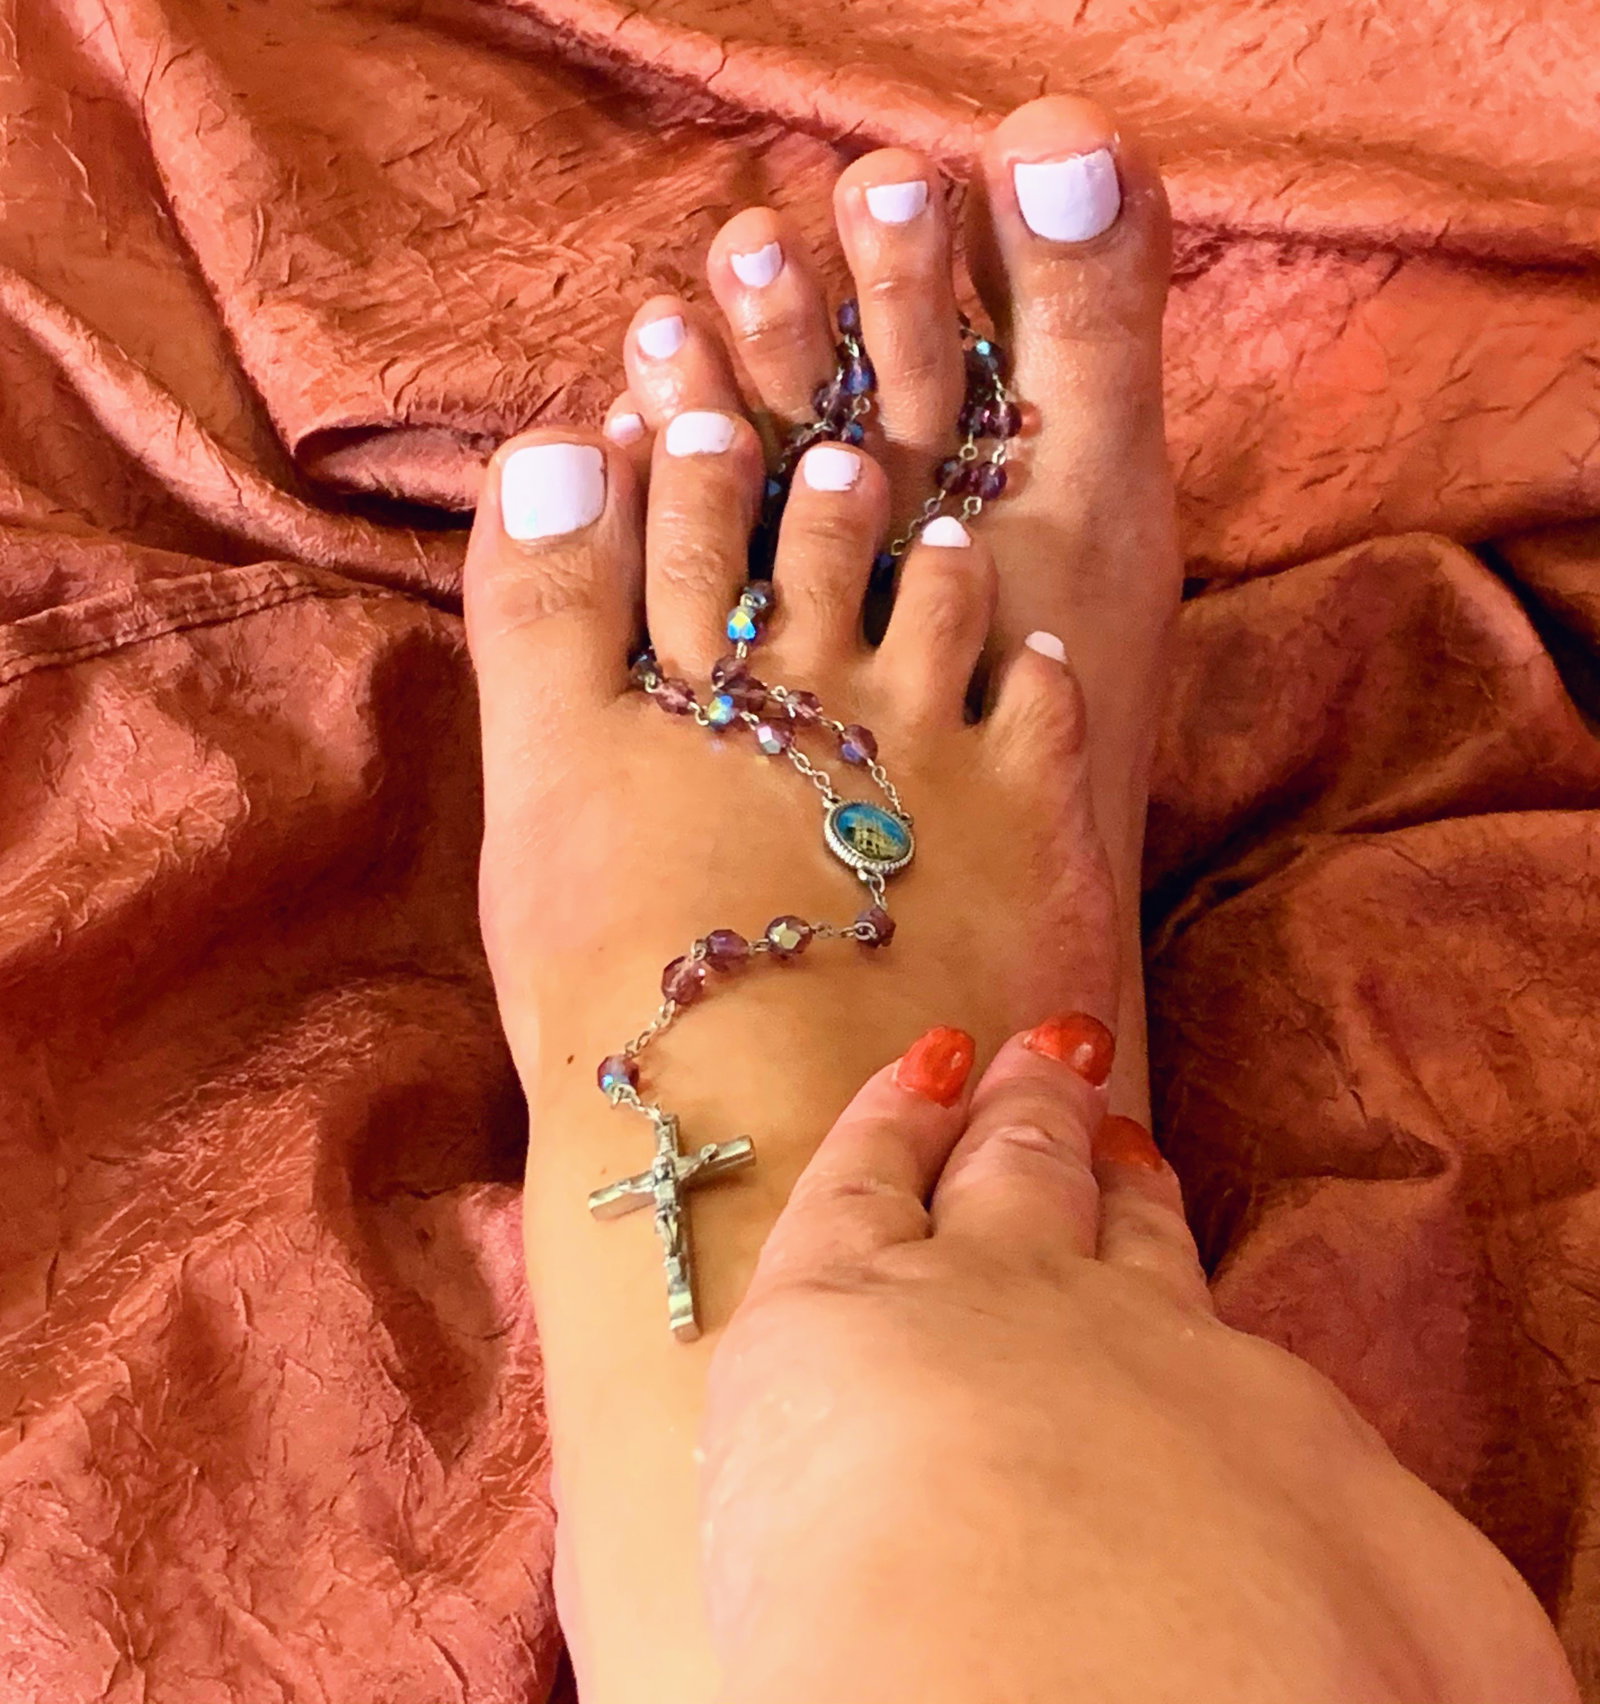 Photo by Aaliyah Amor with the username @aaliyahamor,  July 17, 2023 at 2:55 AM. The post is about the topic Sexy Feet and the text says '#footfetish #sole2bare #$djexotica $22 bucks for 11 sexy, multi-angled, #toespreading, wrinkling the #sole. 

what do yall like... i have a dremel i use to get the calluses off and sell to men that LOVE MY taste/texture/scent..'